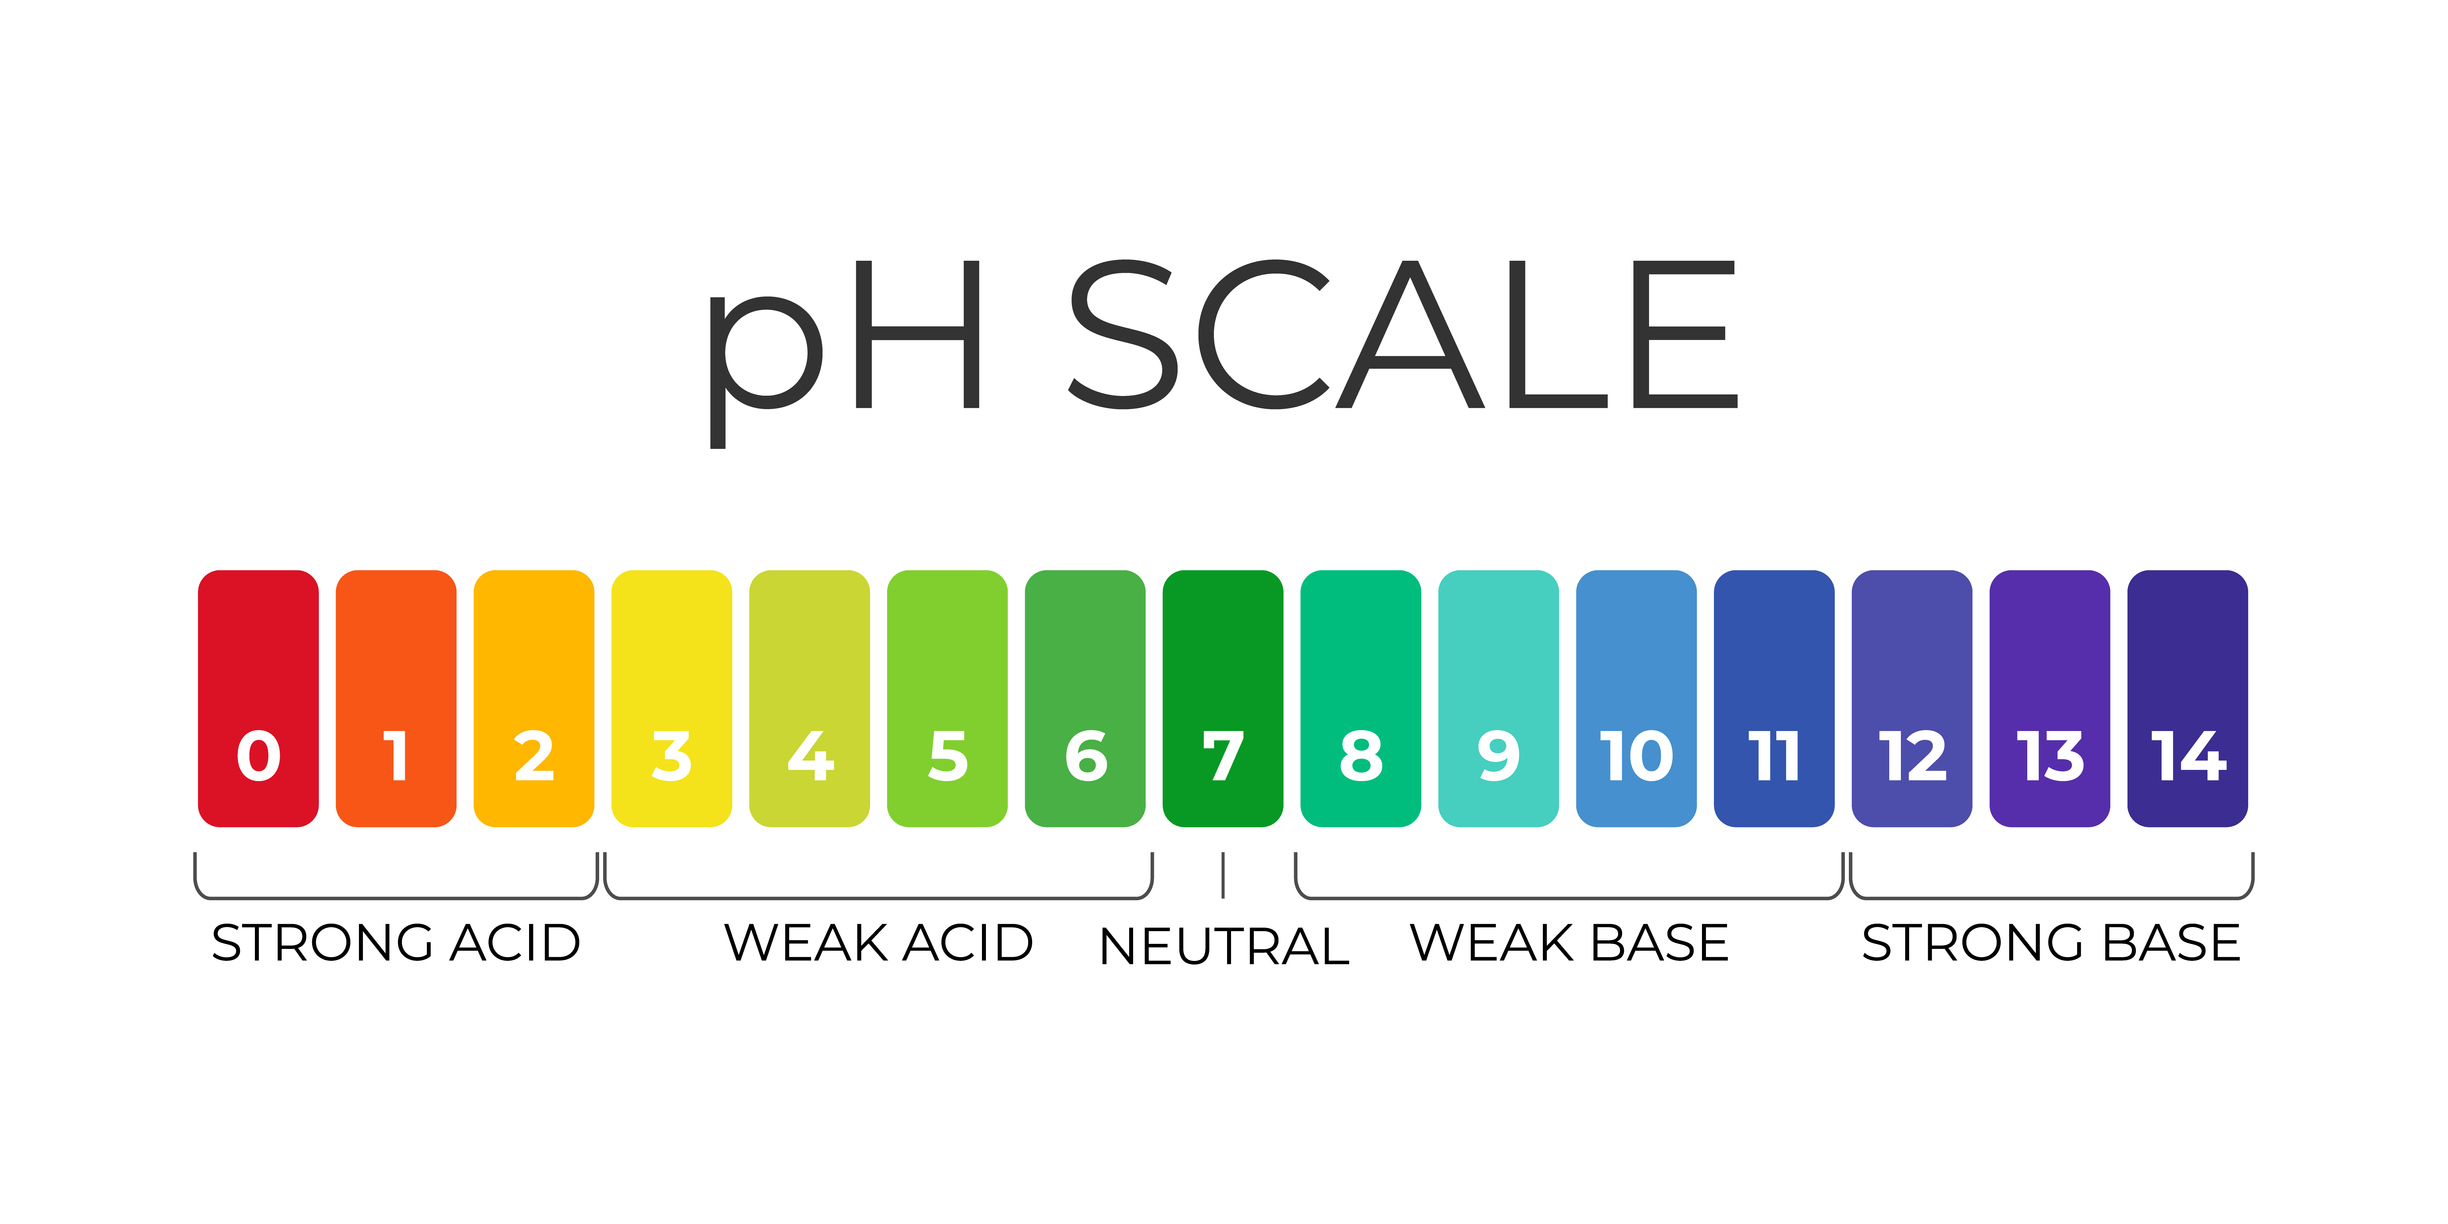 pH scale infographic chart